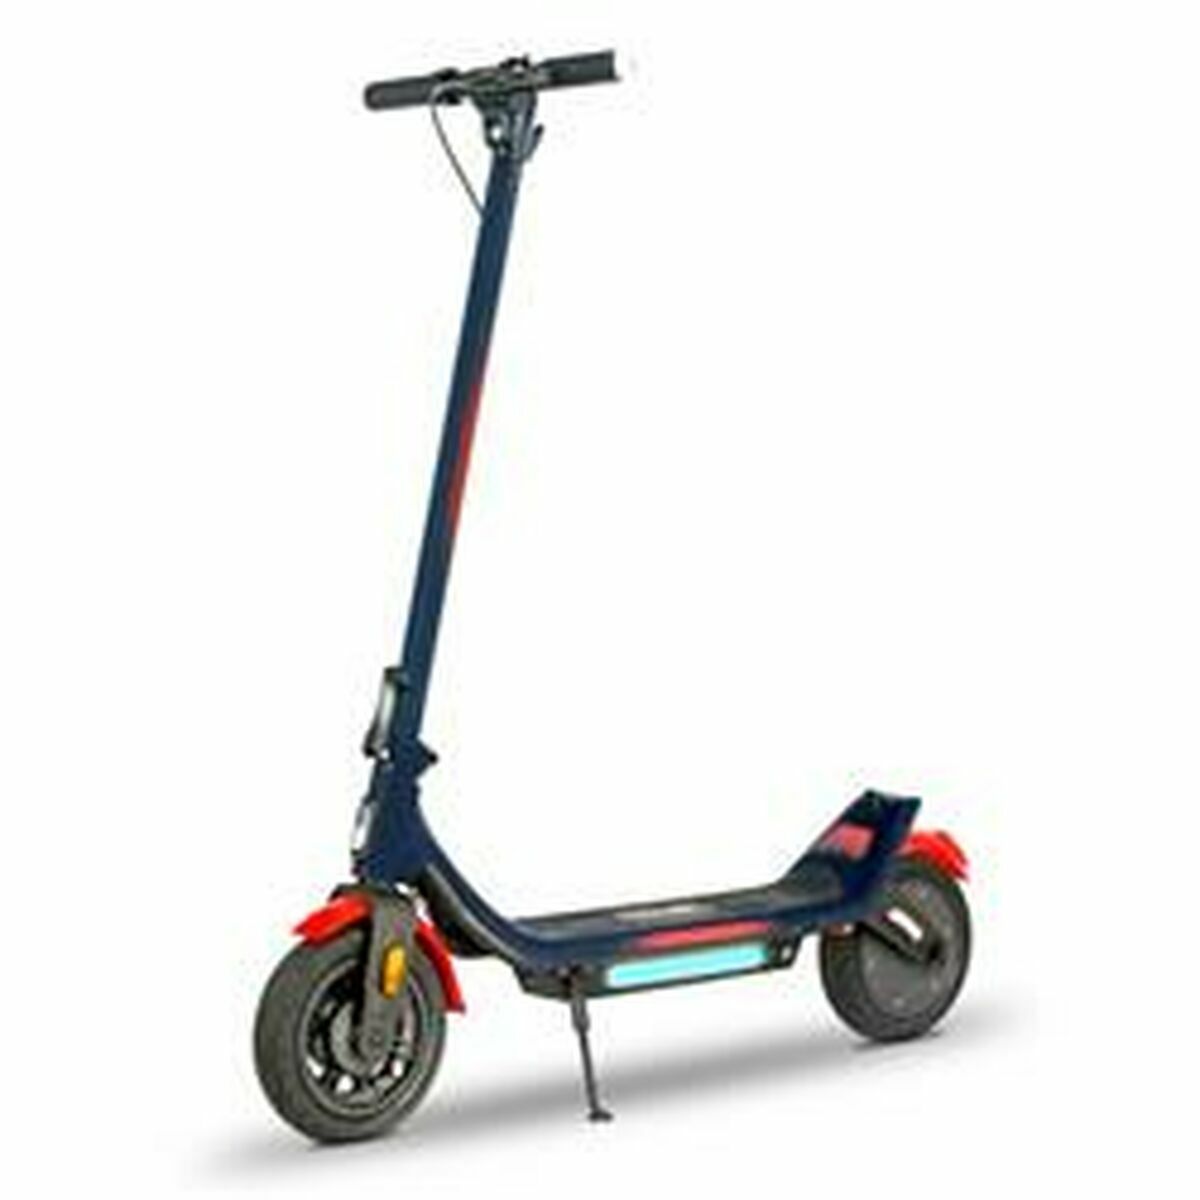 Electric Scooter Red Bull 4895232707393 500 W 350 W 36 V, Red Bull, Sports and outdoors, Urban mobility, electric-scooter-red-bull-4895232707393-500-w-350-w-36-v, Brand_Red Bull, category-reference-2609, category-reference-2629, category-reference-2904, category-reference-t-19681, category-reference-t-19756, category-reference-t-19876, category-reference-t-21245, category-reference-t-25387, Condition_NEW, deportista / en forma, Price_500 - 600, RiotNook